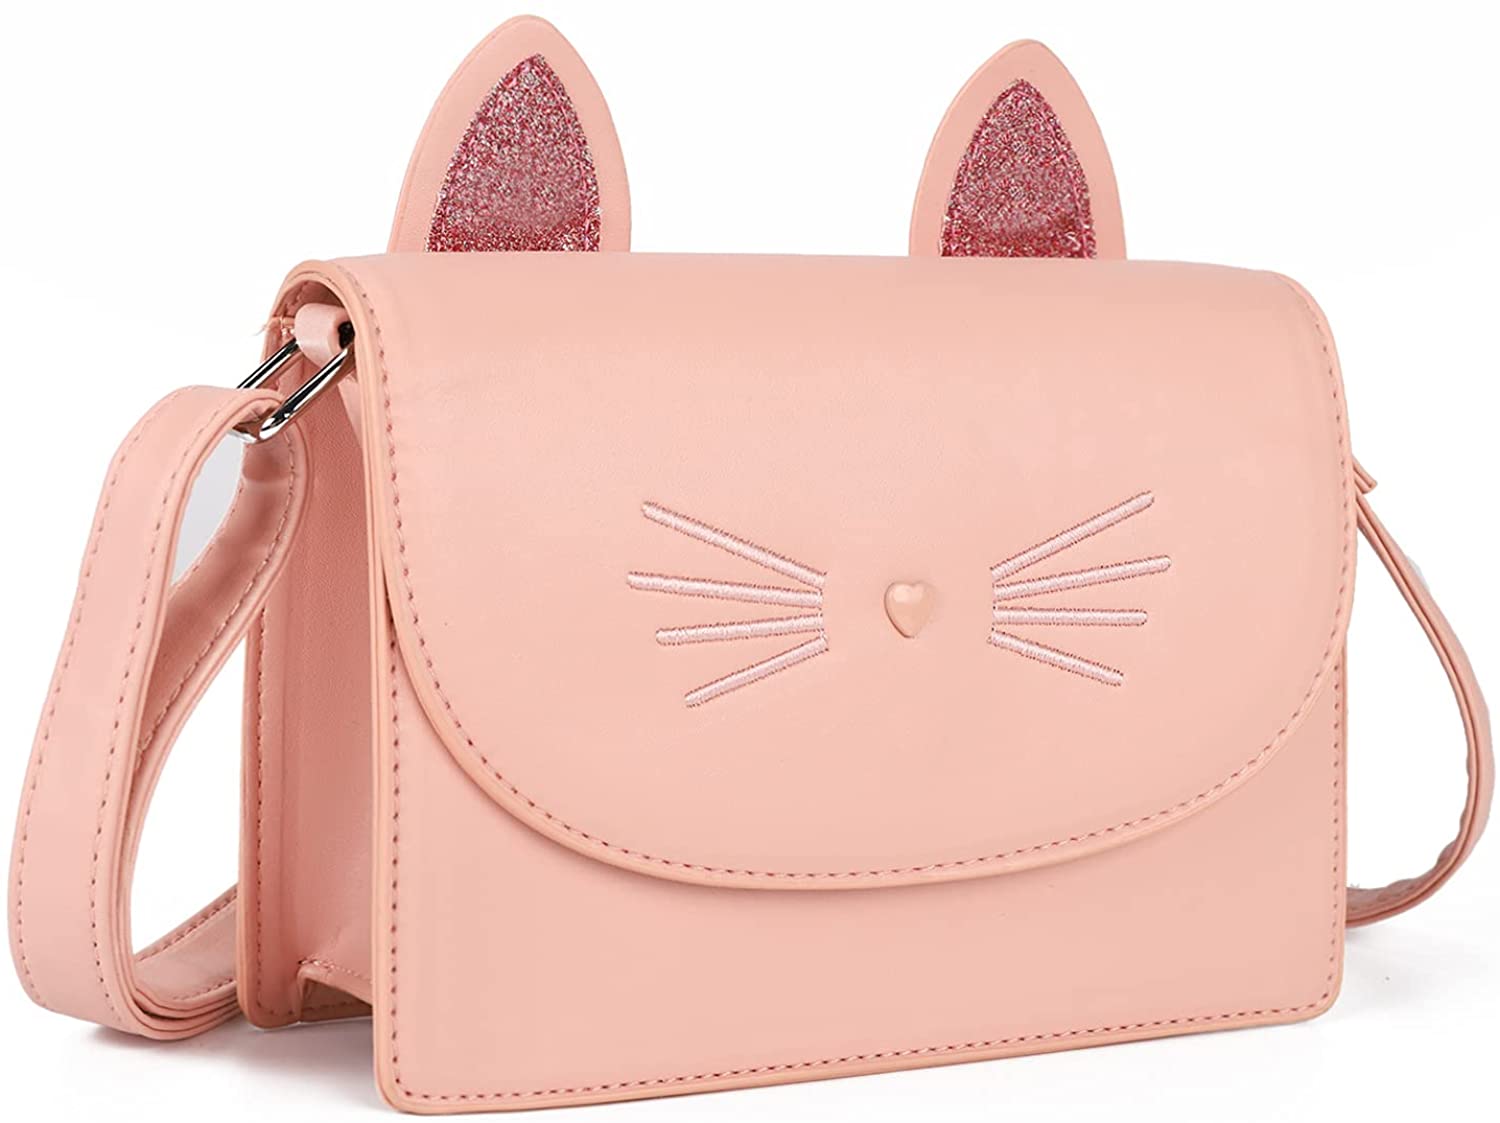 Cute Purses for Teen Girls Small Crossbody Purse and Handbags Cat Gifts for Kids